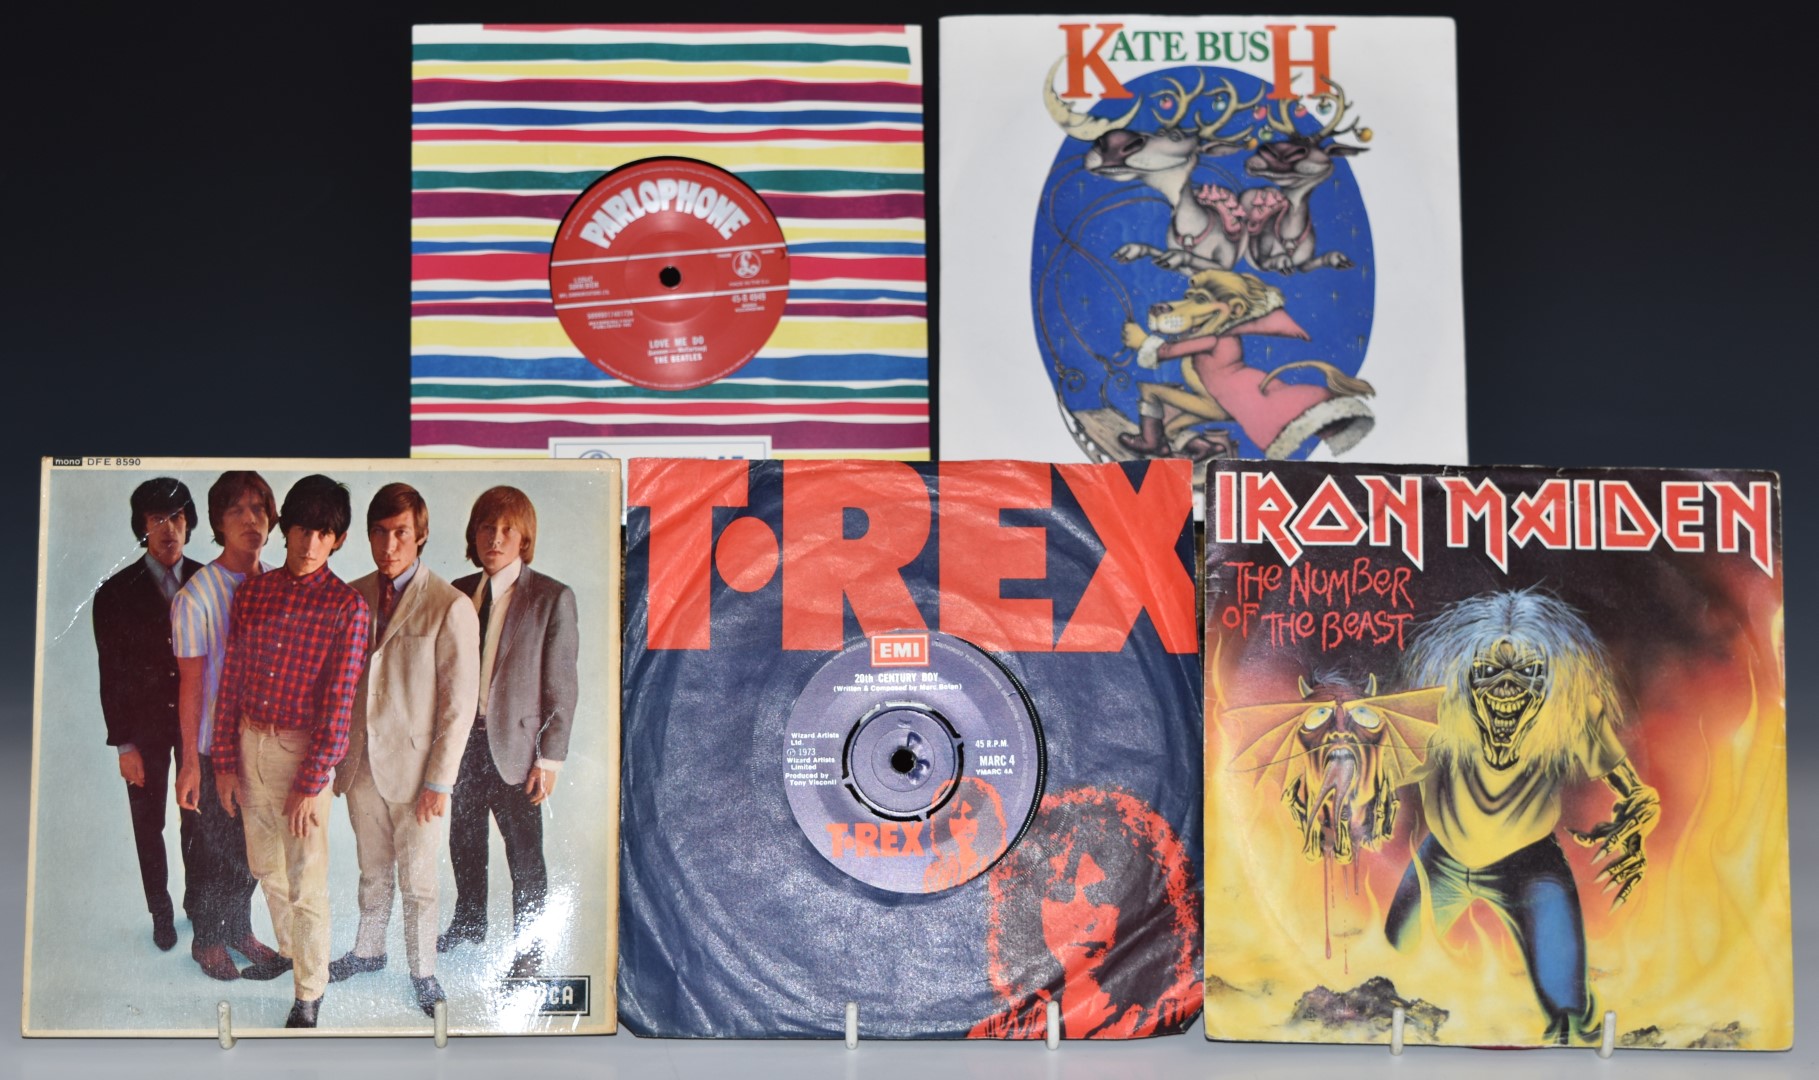 Approximately 60 singles including David Bowie, Queen, AC/DC, Iron Maiden, The Sweet and Kate Bush